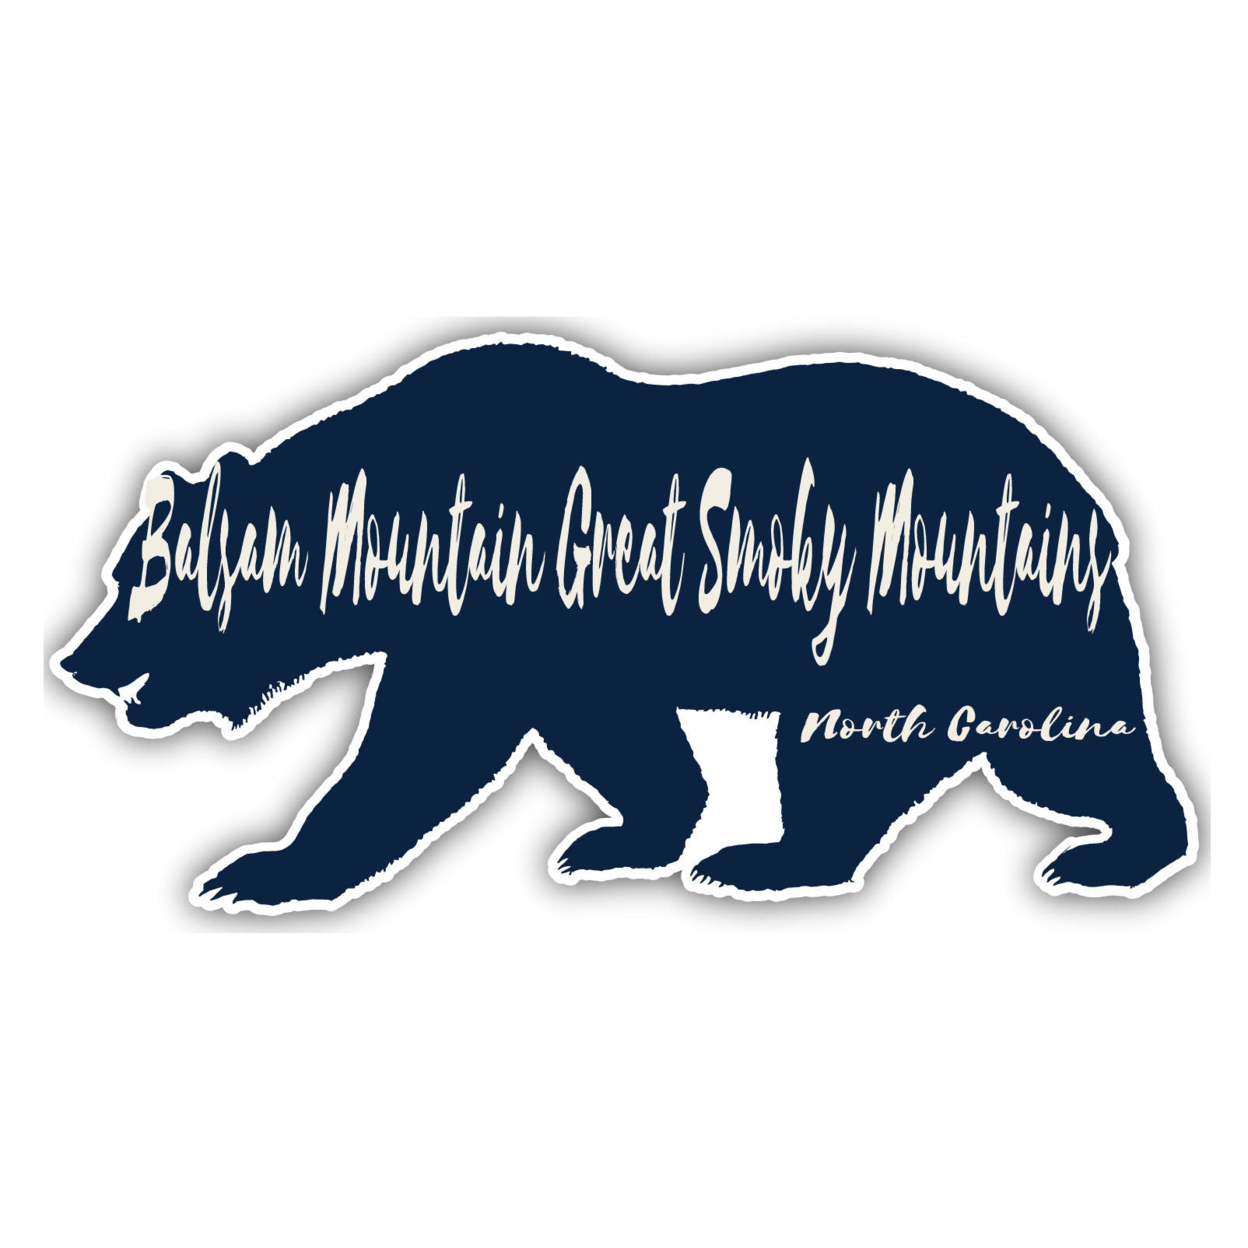 Balsam Mountain Great Smoky Mountains North Carolina Souvenir Decorative Stickers (Choose Theme And Size) - 4-Pack, 6-Inch, Bear